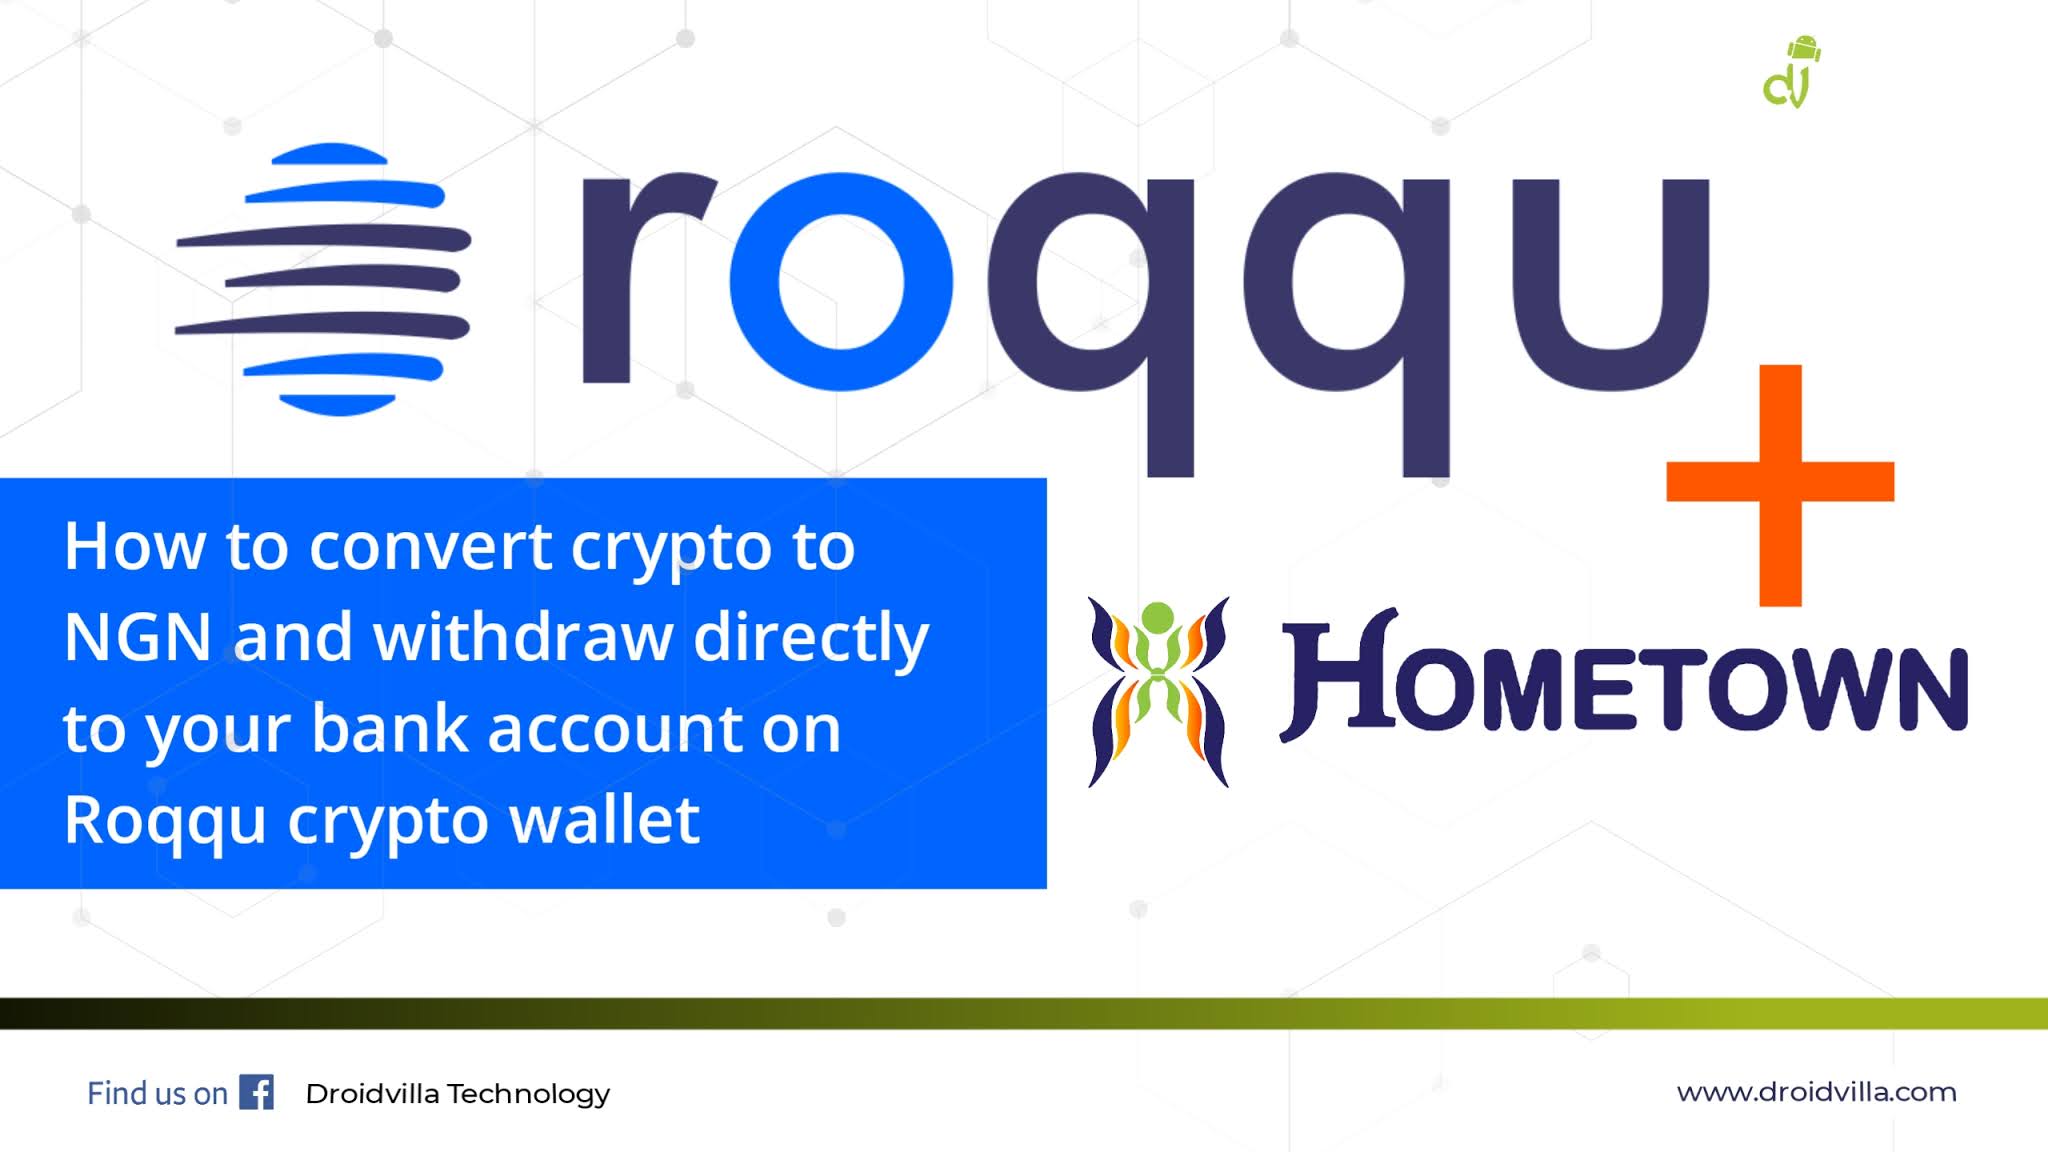 how-to-convert-crypto-to-ngn-and-withdraw-directly-to-your-bank-account-on-roqqu-crypto-wallet-droidvilla-tech-1-android-tech-blog